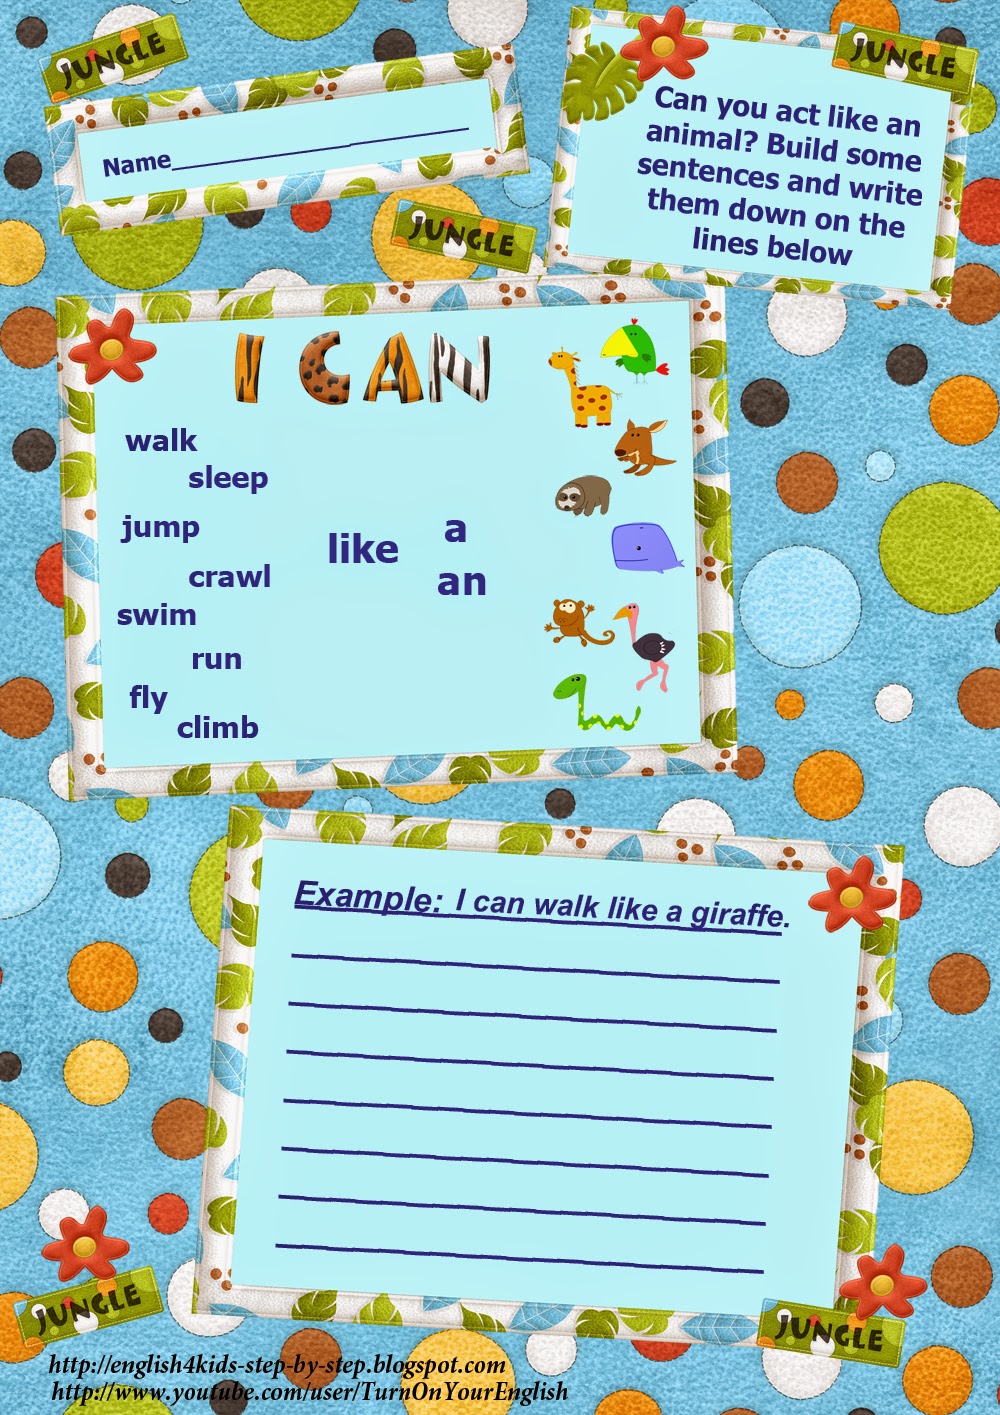 i-can-action-verbs-song-for-kids-flashcards-and-worksheets